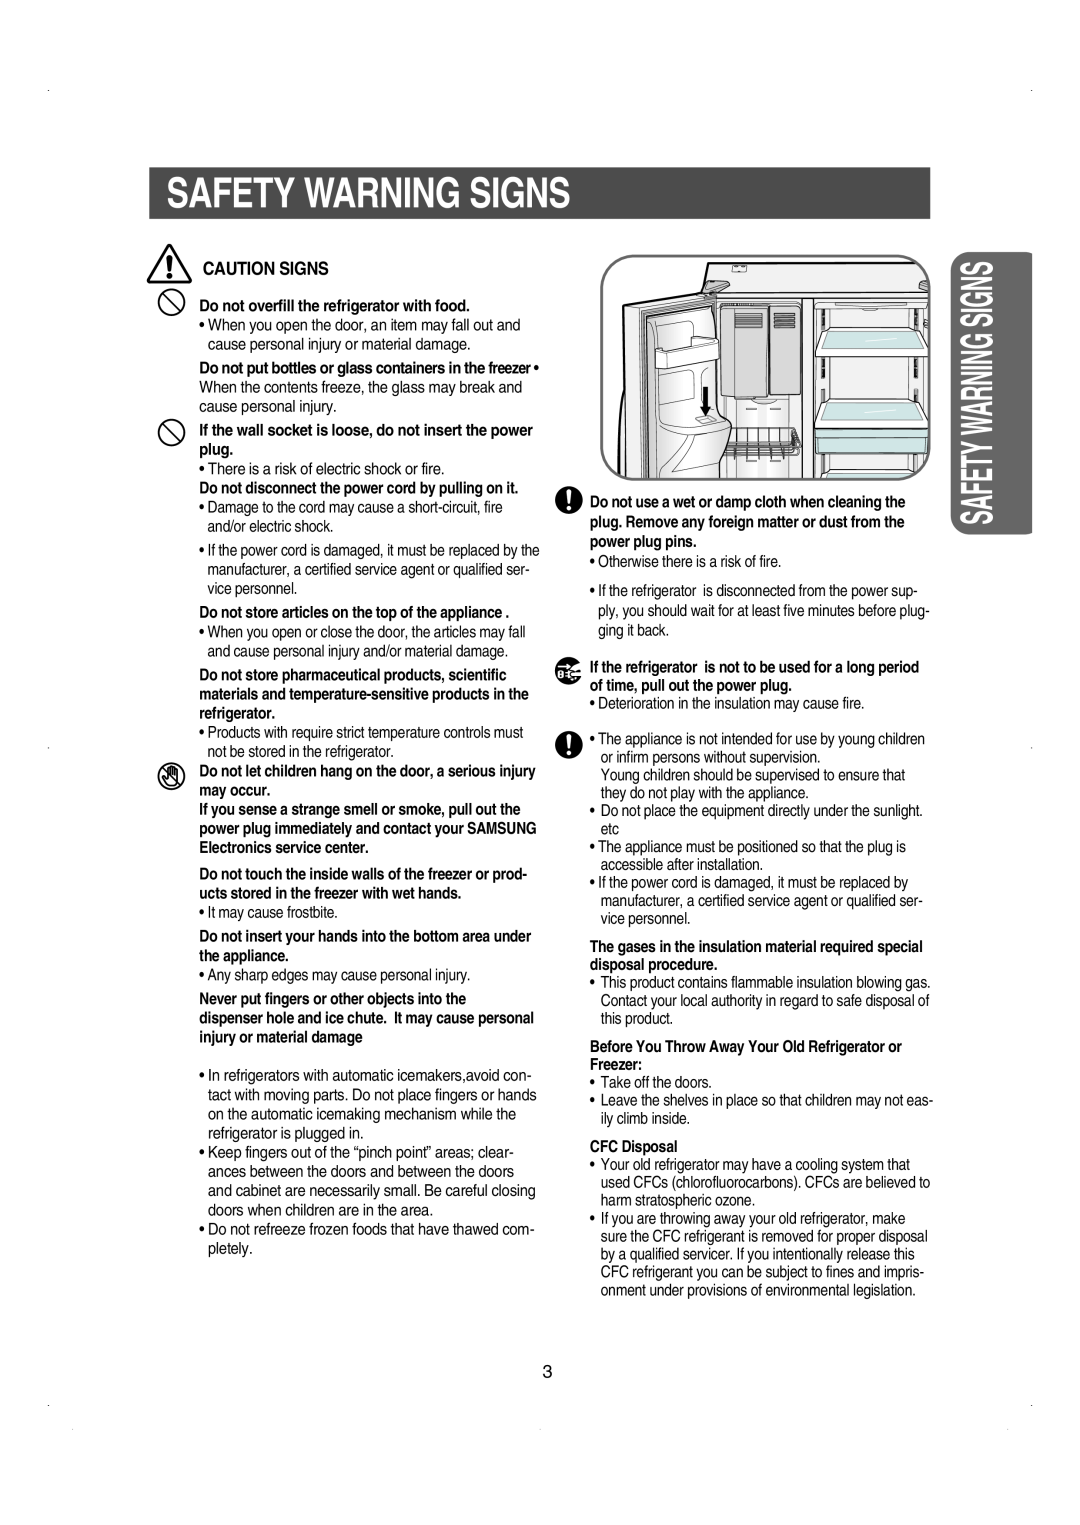 Samsung RS26WUNS Caution Signs, Safety Warning Signs, Do not overfill the refrigerator with food, CFC Disposal 